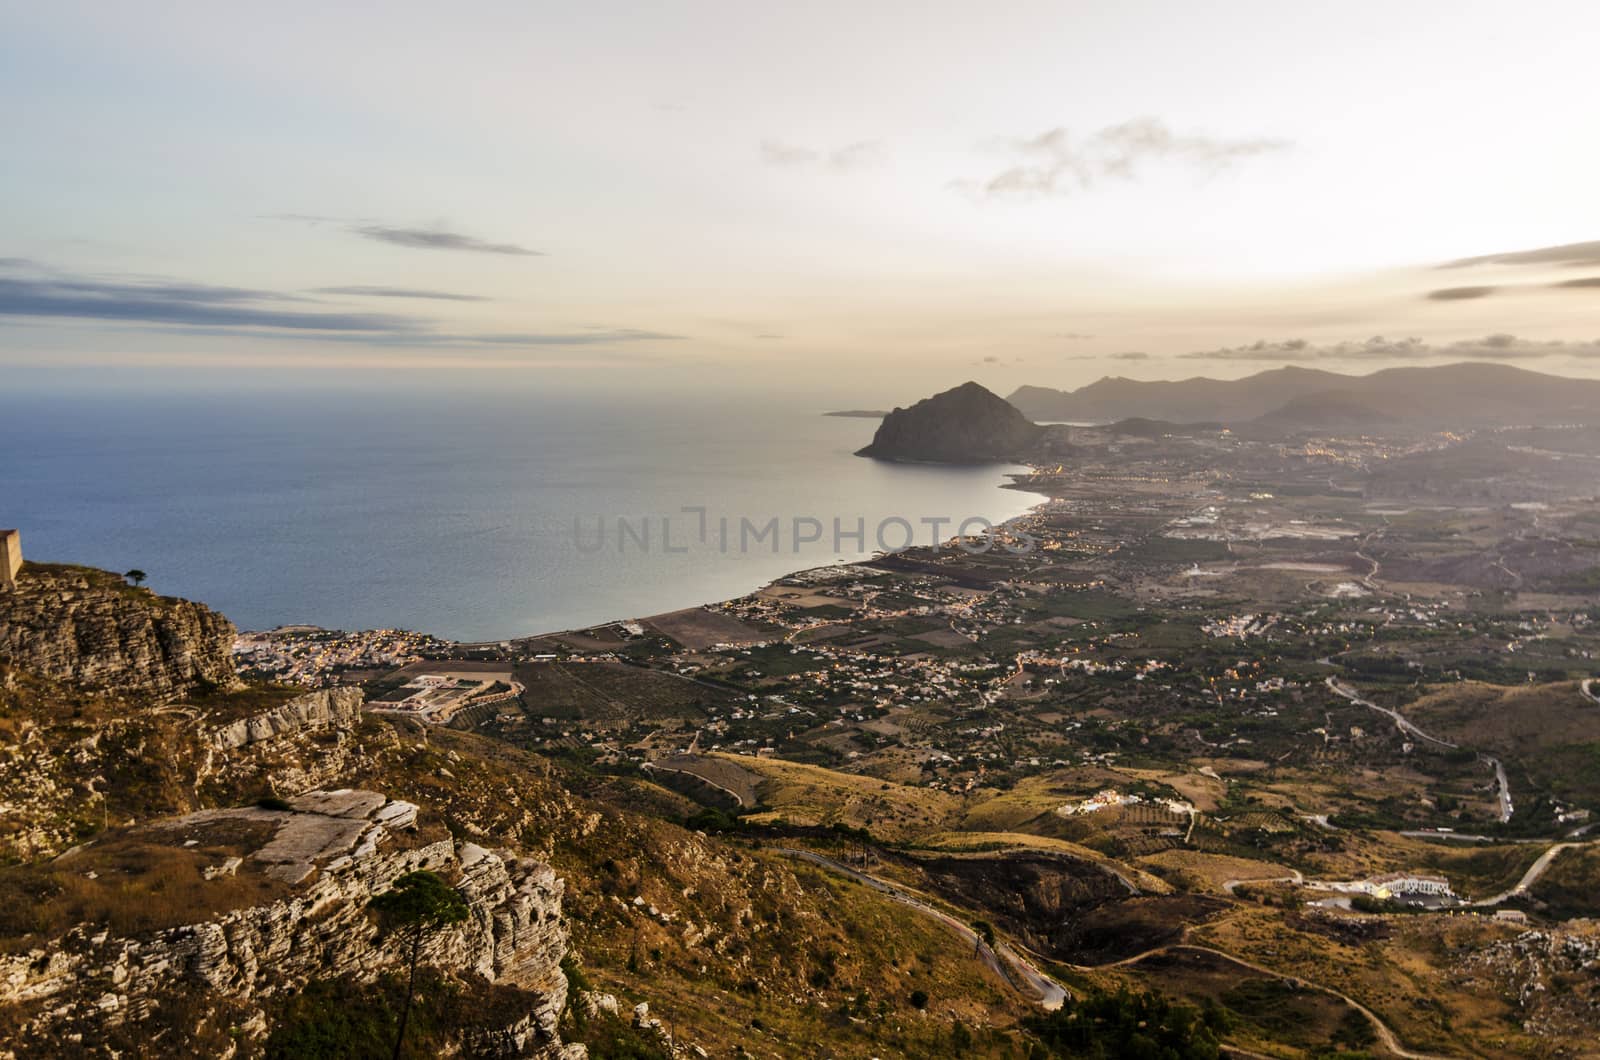 The natural reserve of Mount Cofano on the Sicilian coast is seen from the city of erice